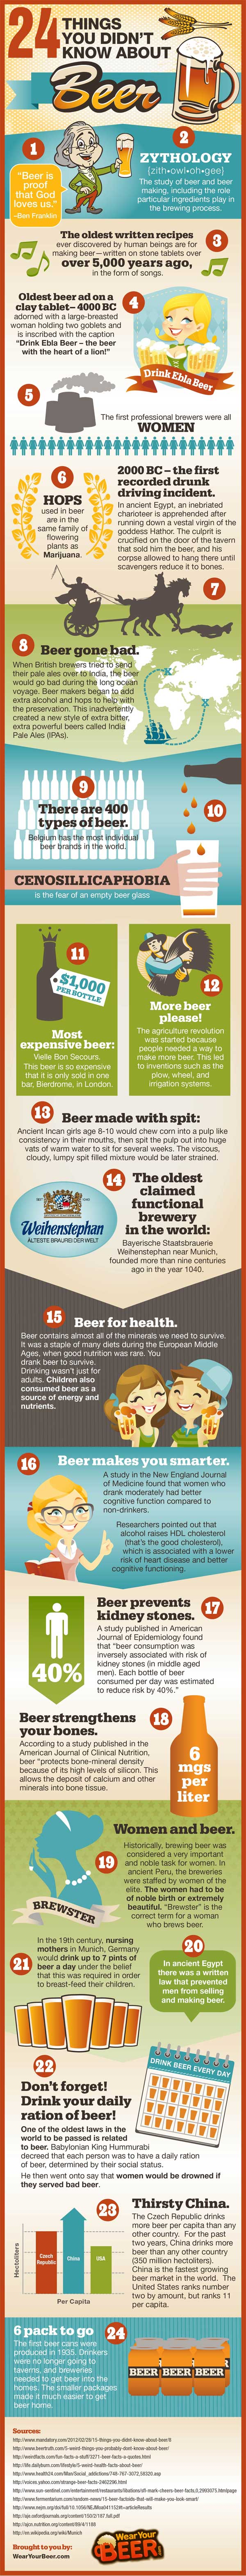 24 things you didn't know about beer